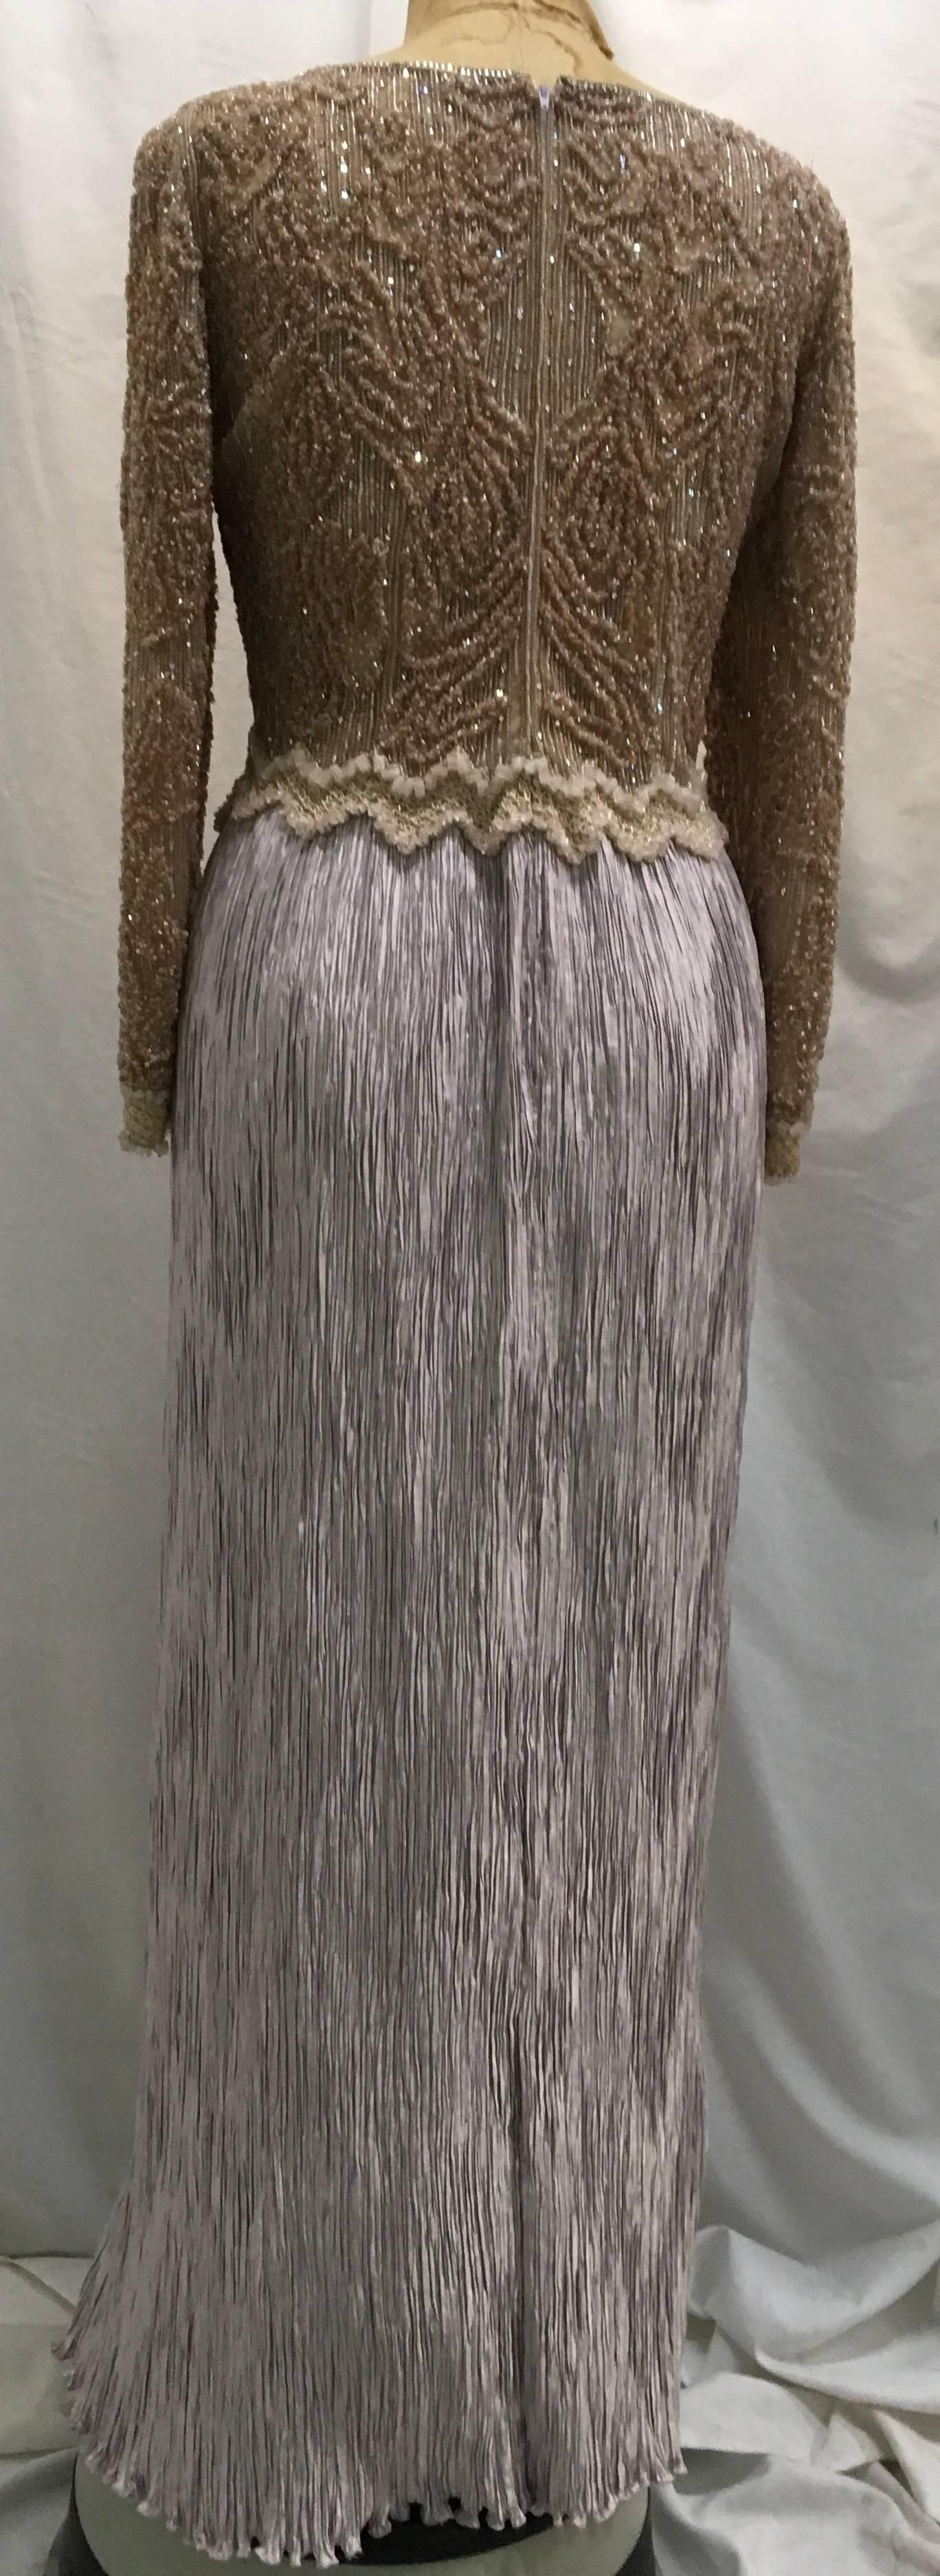 Mary McFadden Beige Beaded Bodice w/ Light Lavender Skirt In Excellent Condition For Sale In Boca Raton, FL